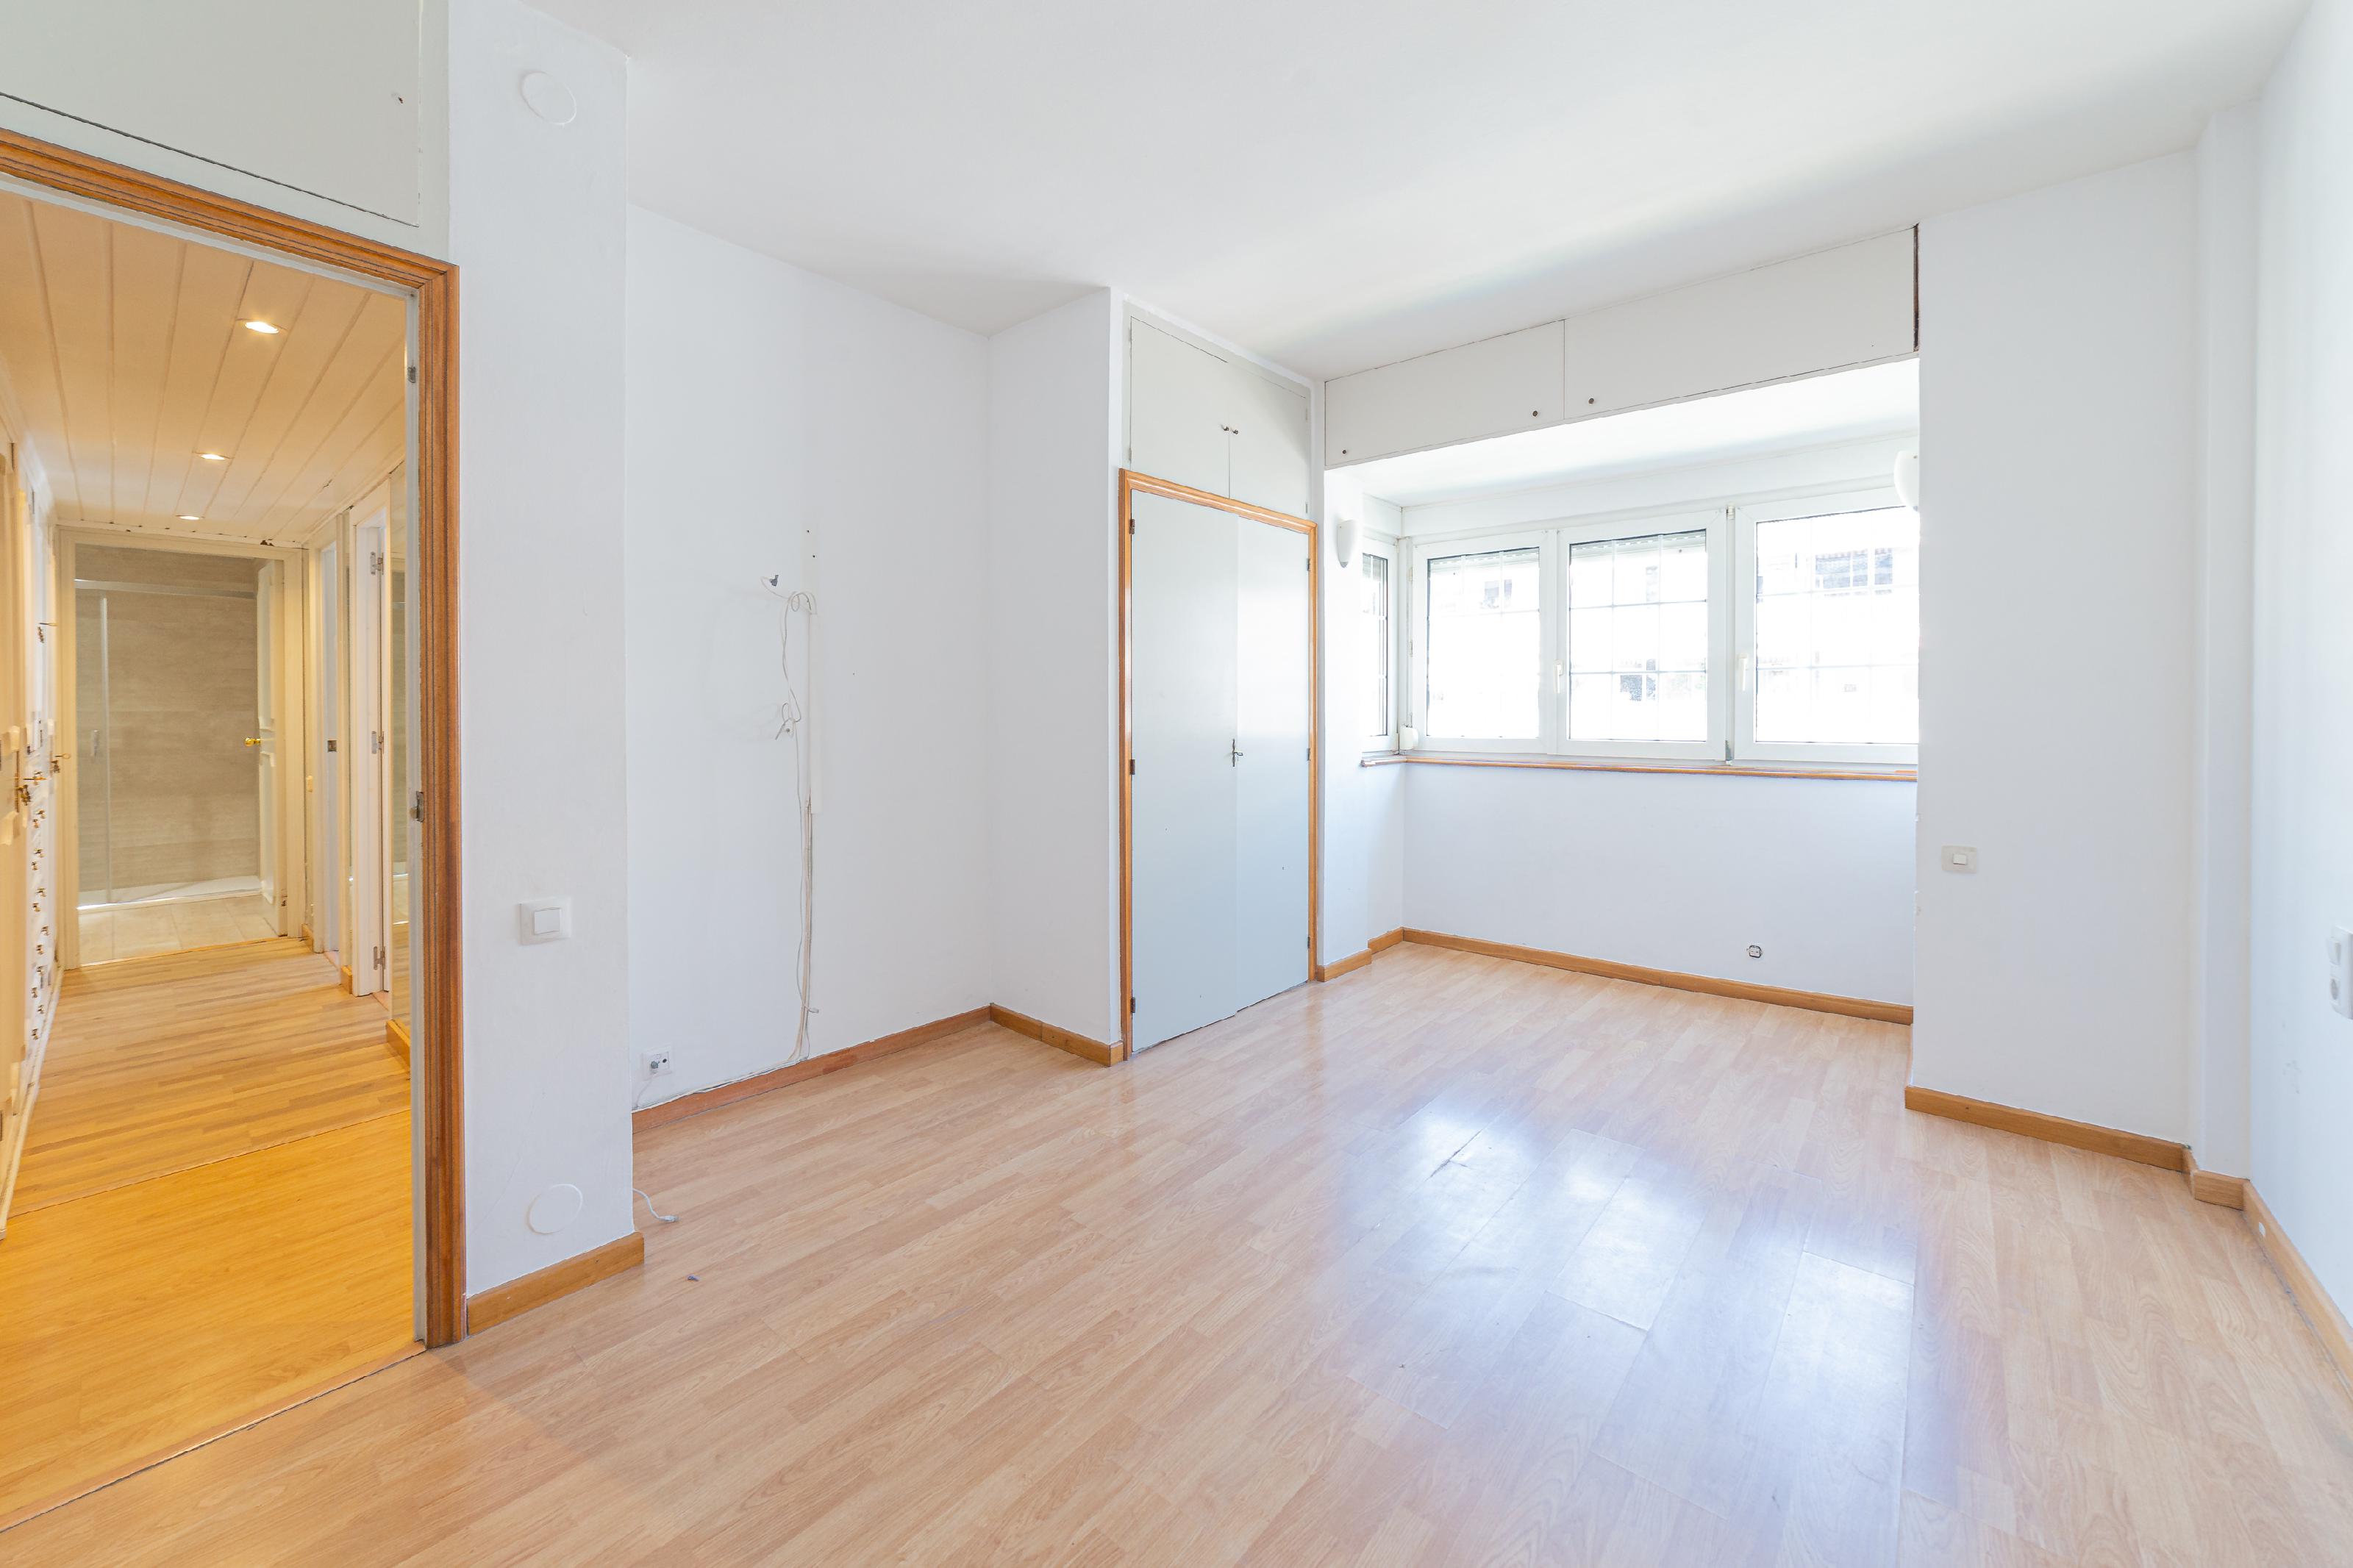 272927 Flat for sale in Les Corts, Pedralbes 4